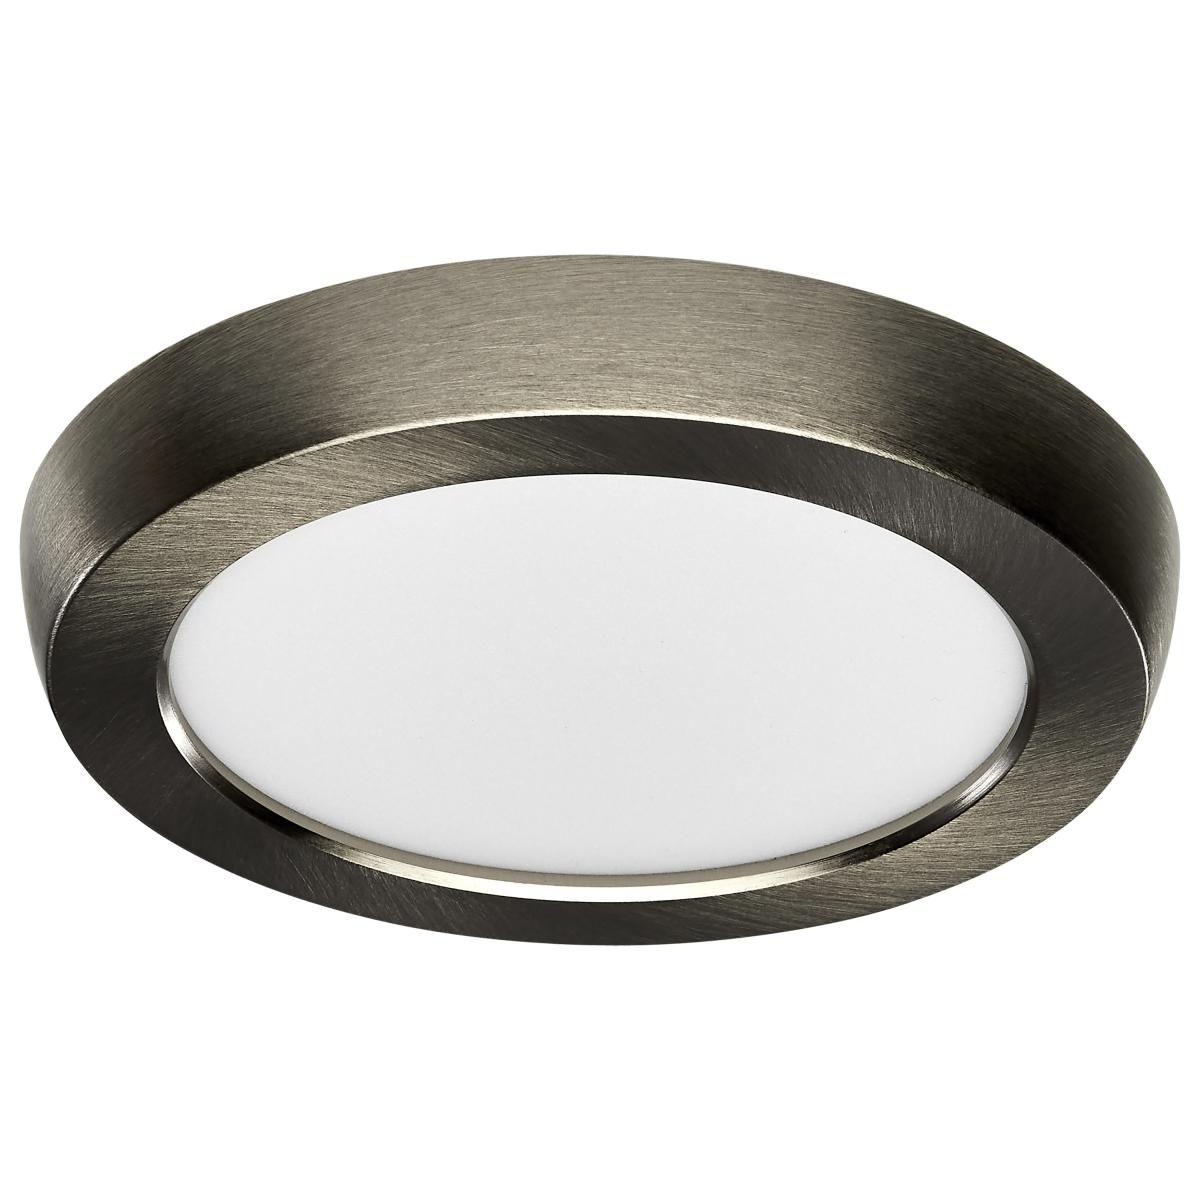 Blink 5 in. LED Round Disk Light 9W Selectable CCT